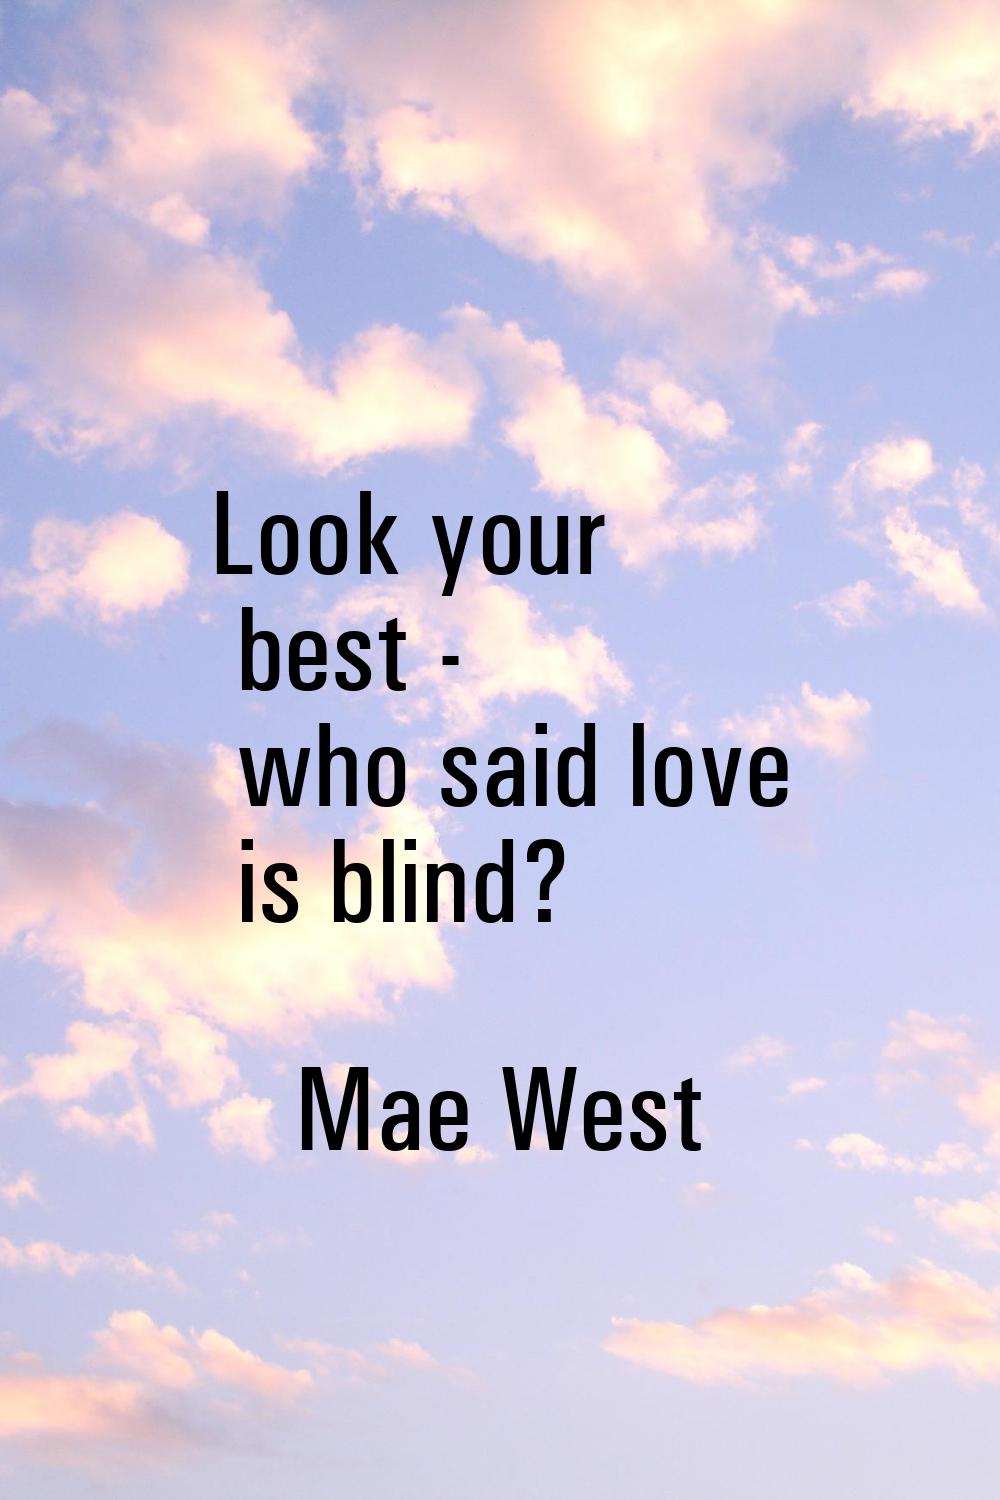 Look your best - who said love is blind?